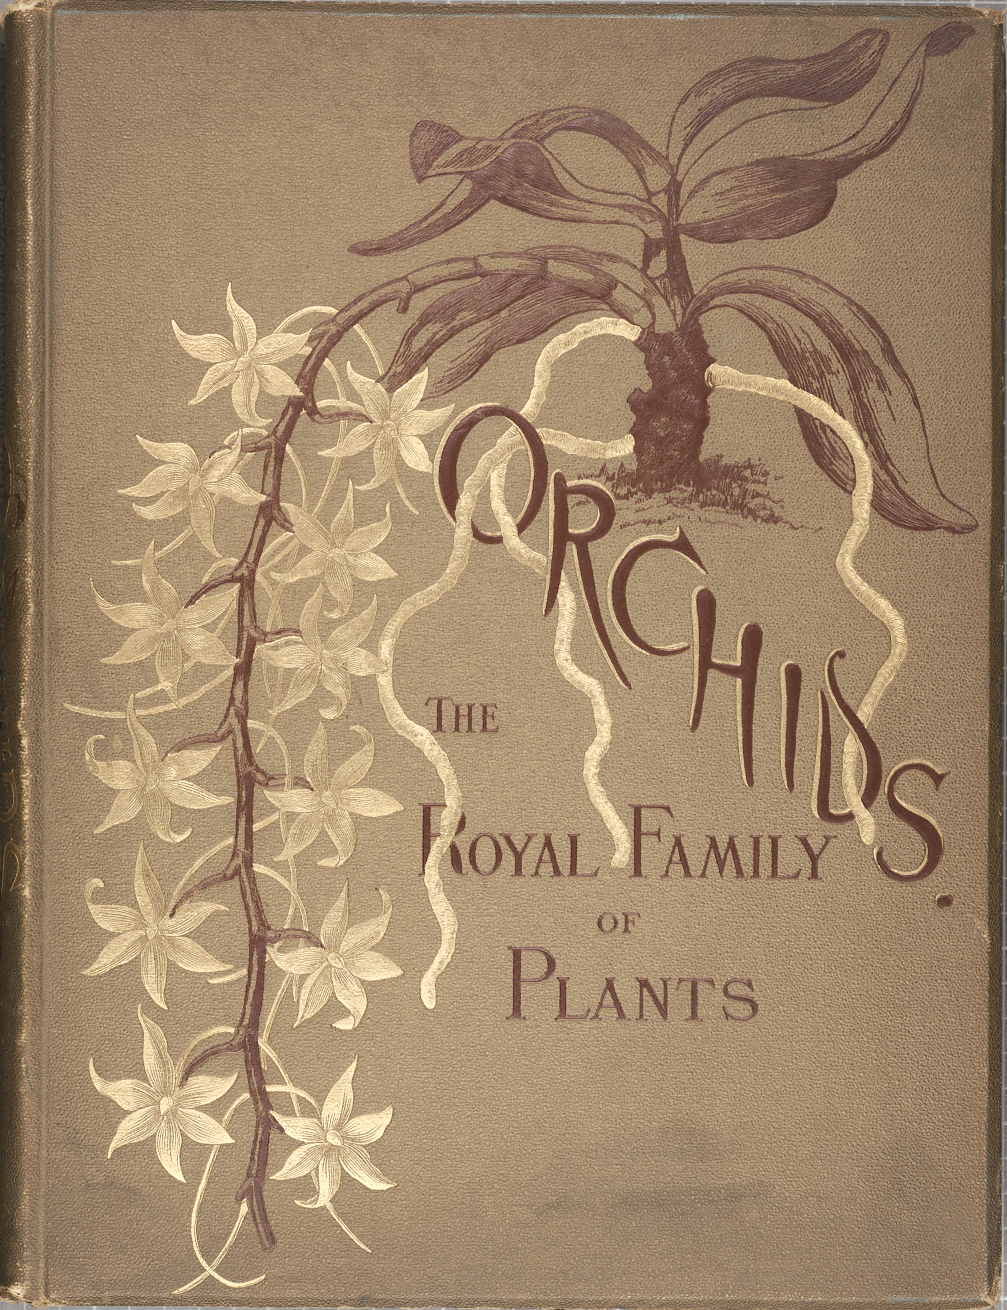 Orchids-Royal Family of Plants-Harriet
                          Stewart Miner